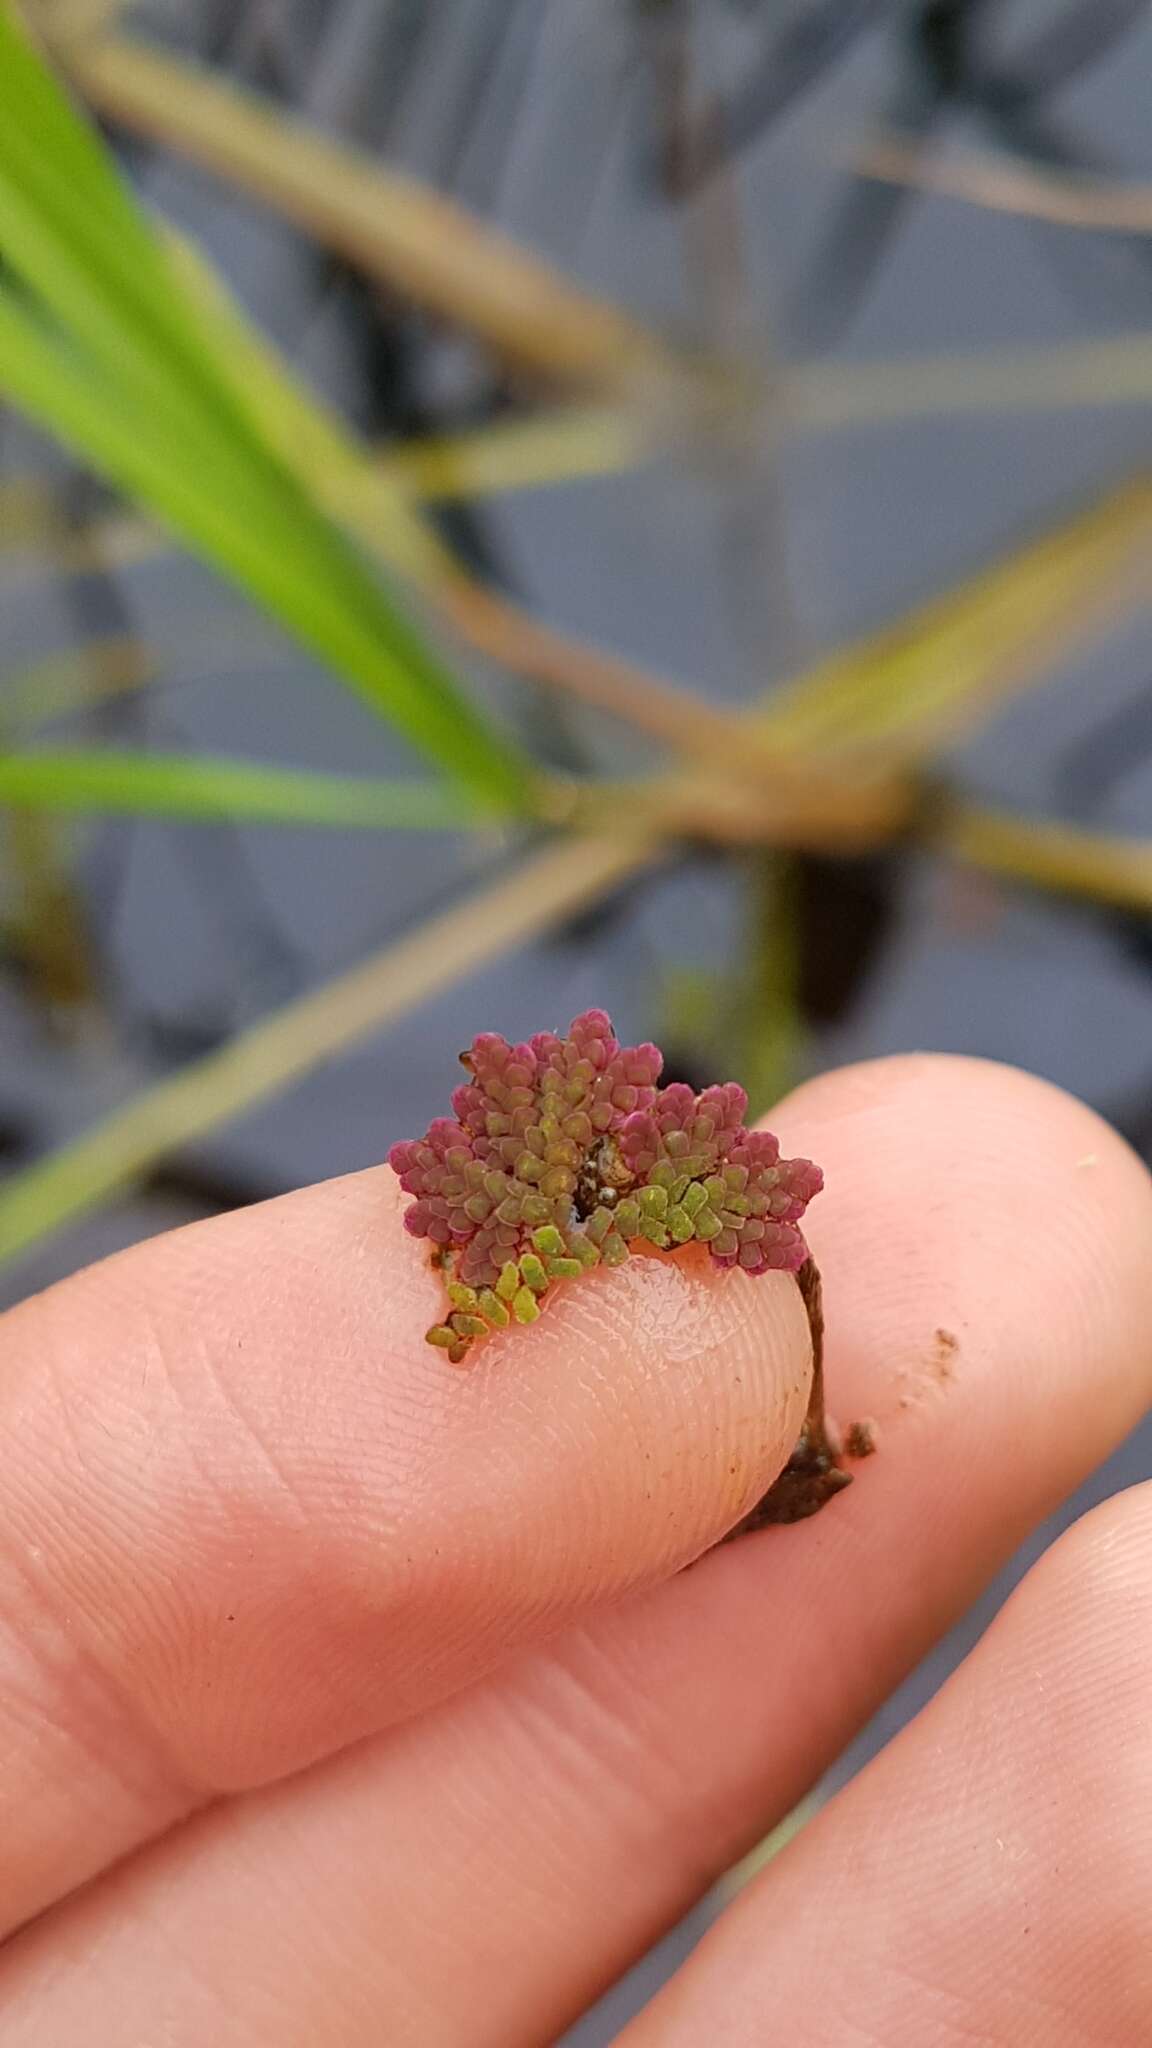 Image of Azolla filiculoides subsp. cristata (Kaulf.) Fraser-Jenk.